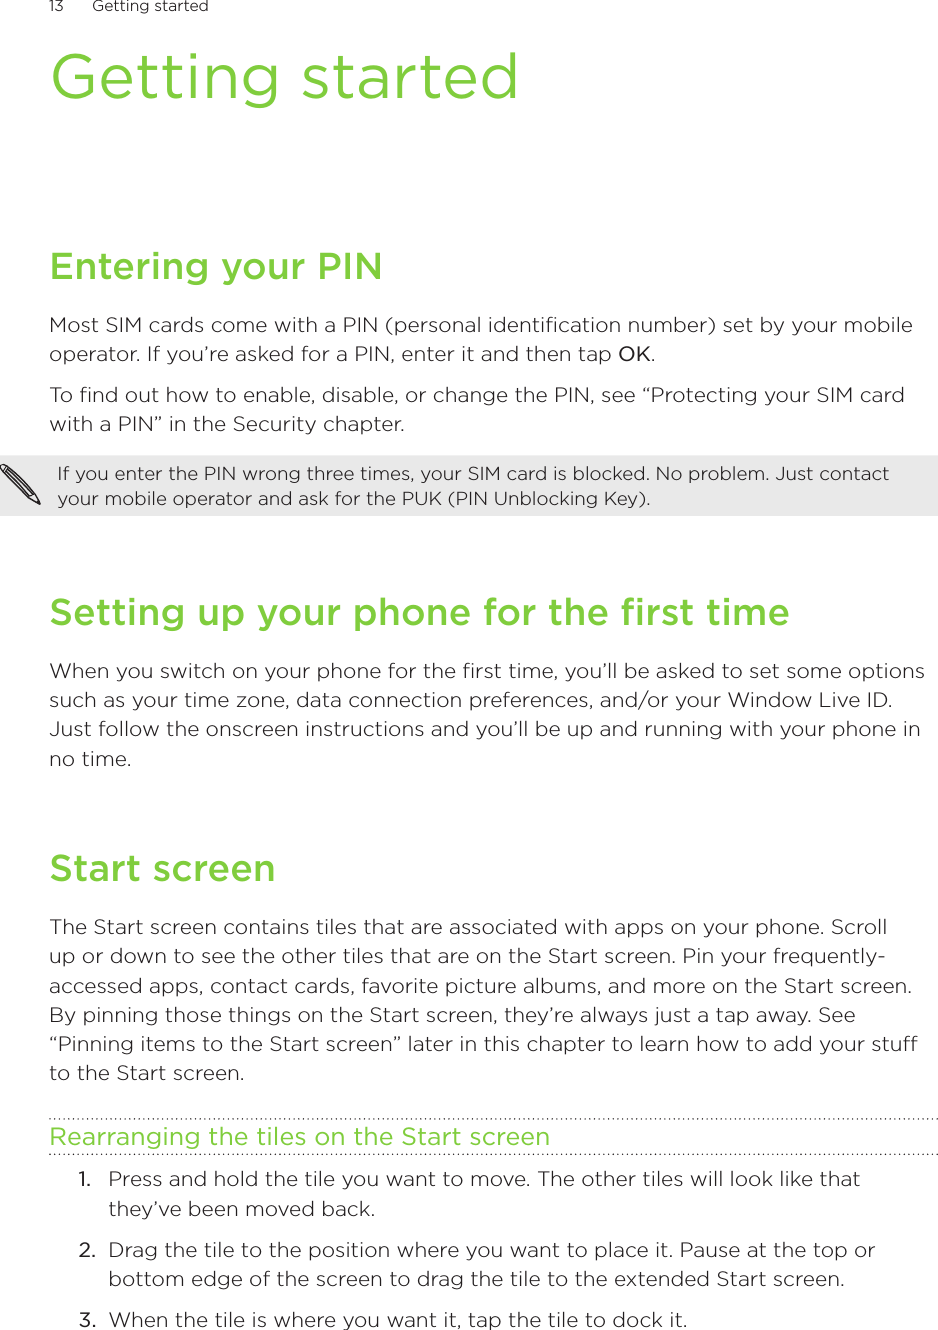 13      Getting started      Getting startedEntering your PINMost SIM cards come with a PIN (personal identification number) set by your mobile operator. If you’re asked for a PIN, enter it and then tap OK.To find out how to enable, disable, or change the PIN, see “Protecting your SIM card with a PIN” in the Security chapter.If you enter the PIN wrong three times, your SIM card is blocked. No problem. Just contact your mobile operator and ask for the PUK (PIN Unblocking Key).Setting up your phone for the first timeWhen you switch on your phone for the first time, you’ll be asked to set some options such as your time zone, data connection preferences, and/or your Window Live ID. Just follow the onscreen instructions and you’ll be up and running with your phone in no time. Start screenThe Start screen contains tiles that are associated with apps on your phone. Scroll up or down to see the other tiles that are on the Start screen. Pin your frequently-accessed apps, contact cards, favorite picture albums, and more on the Start screen. By pinning those things on the Start screen, they’re always just a tap away. See “Pinning items to the Start screen” later in this chapter to learn how to add your stuff to the Start screen.Rearranging the tiles on the Start screenPress and hold the tile you want to move. The other tiles will look like that they’ve been moved back.Drag the tile to the position where you want to place it. Pause at the top or bottom edge of the screen to drag the tile to the extended Start screen.When the tile is where you want it, tap the tile to dock it. 1.2.3.